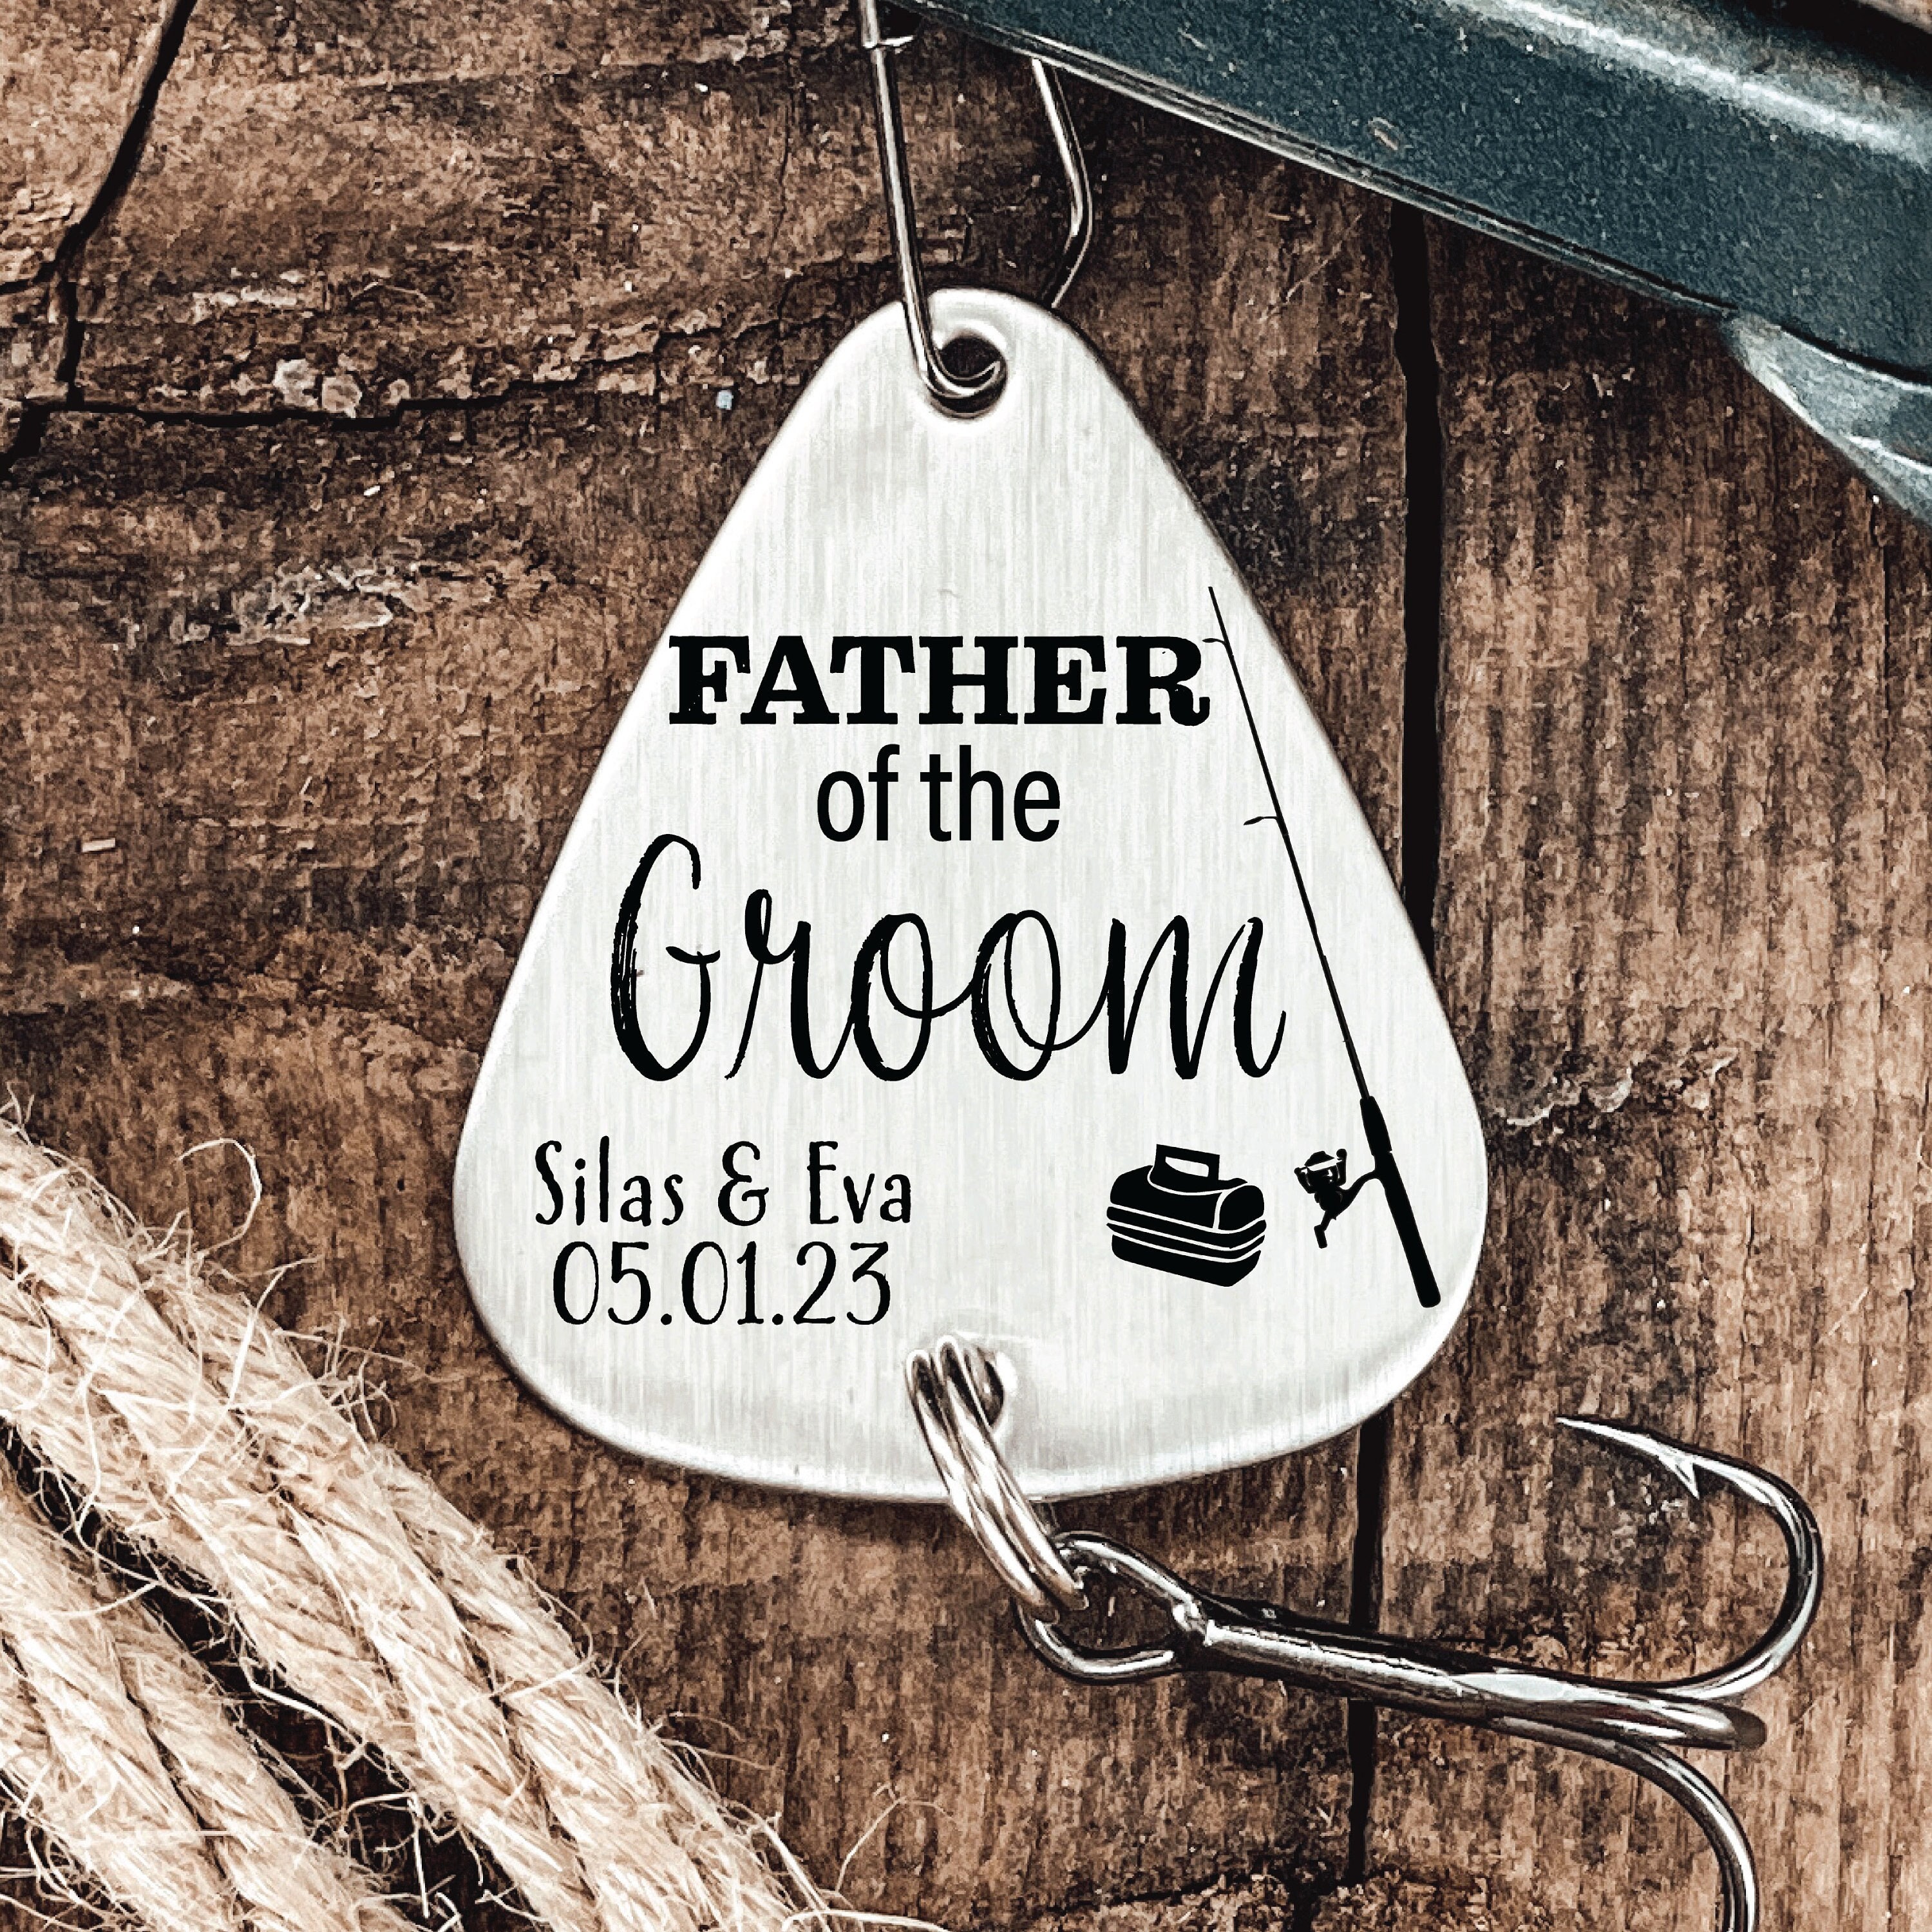 Wedding Gifts for Groomsman Favors for Best Man Personalized Fishing Lure  for Father of the Bride Groom Tropical Destination Engagement Gift 